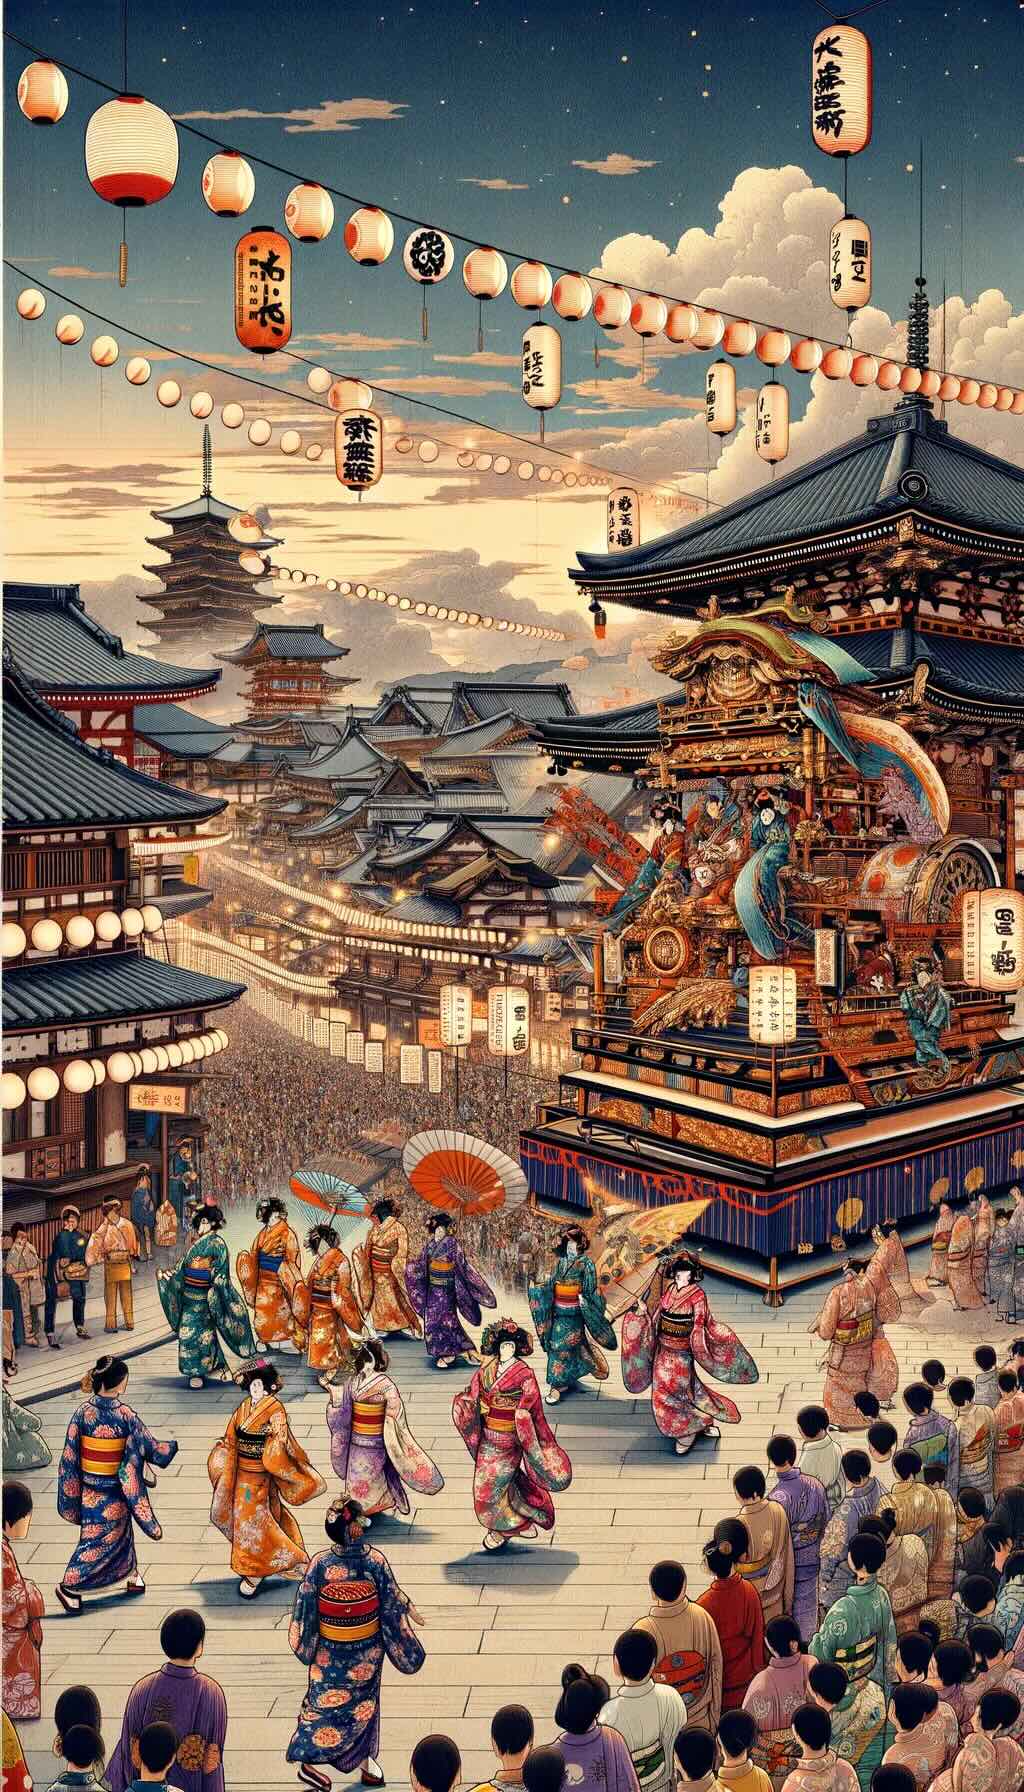 Vibrant scene from a traditional Japanese festival captures the essence of cultural richness, harmoniously blending elements of the past and present